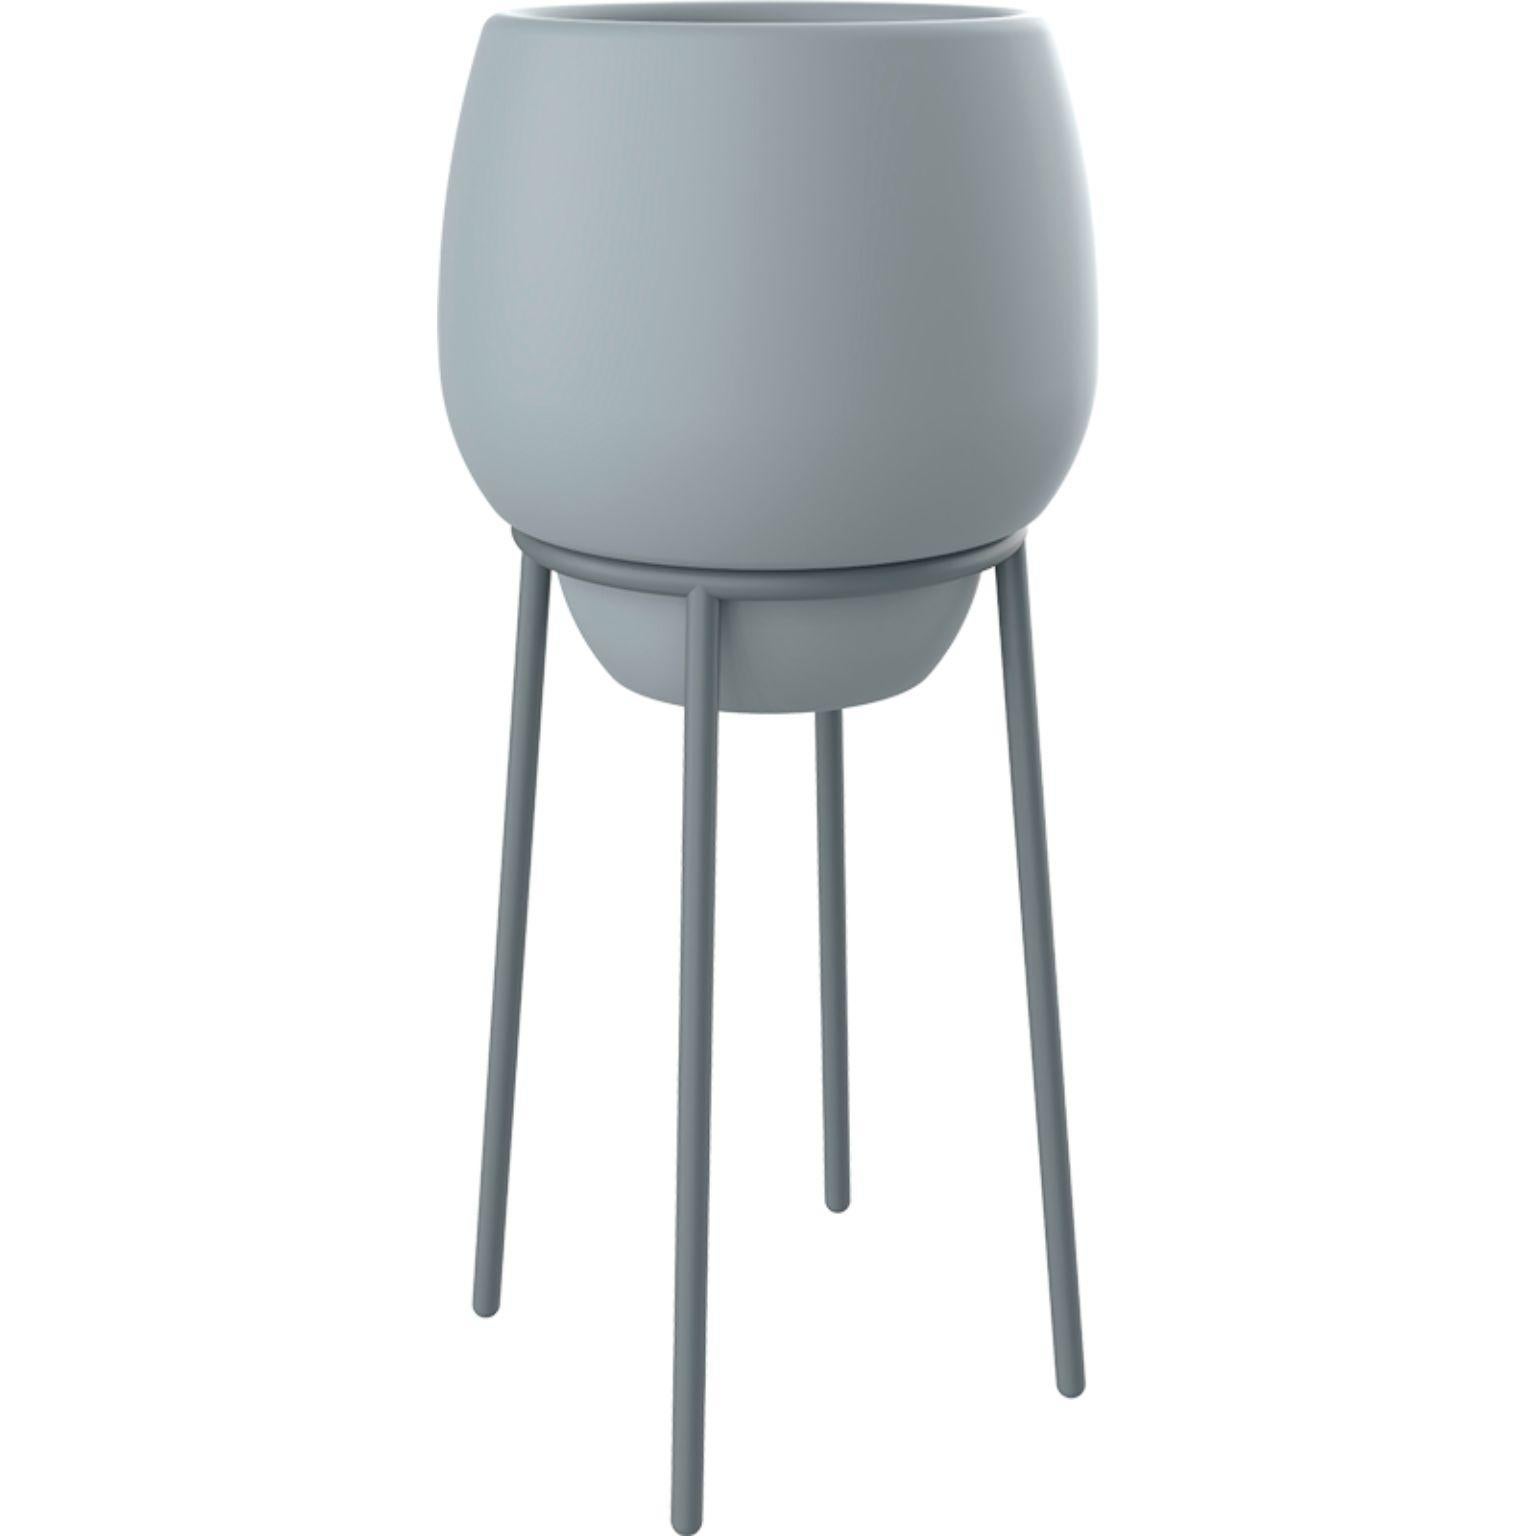 Lace Grey High 50 pot by MOWEE
Dimensions: Ø55 x H112 cm.
Material: Polyethylene and stainless steel.
Weight: 9 kg.
Also available in different colors and finishes (Lacquered or retroilluminated). 

Lace is a collection of furniture made by